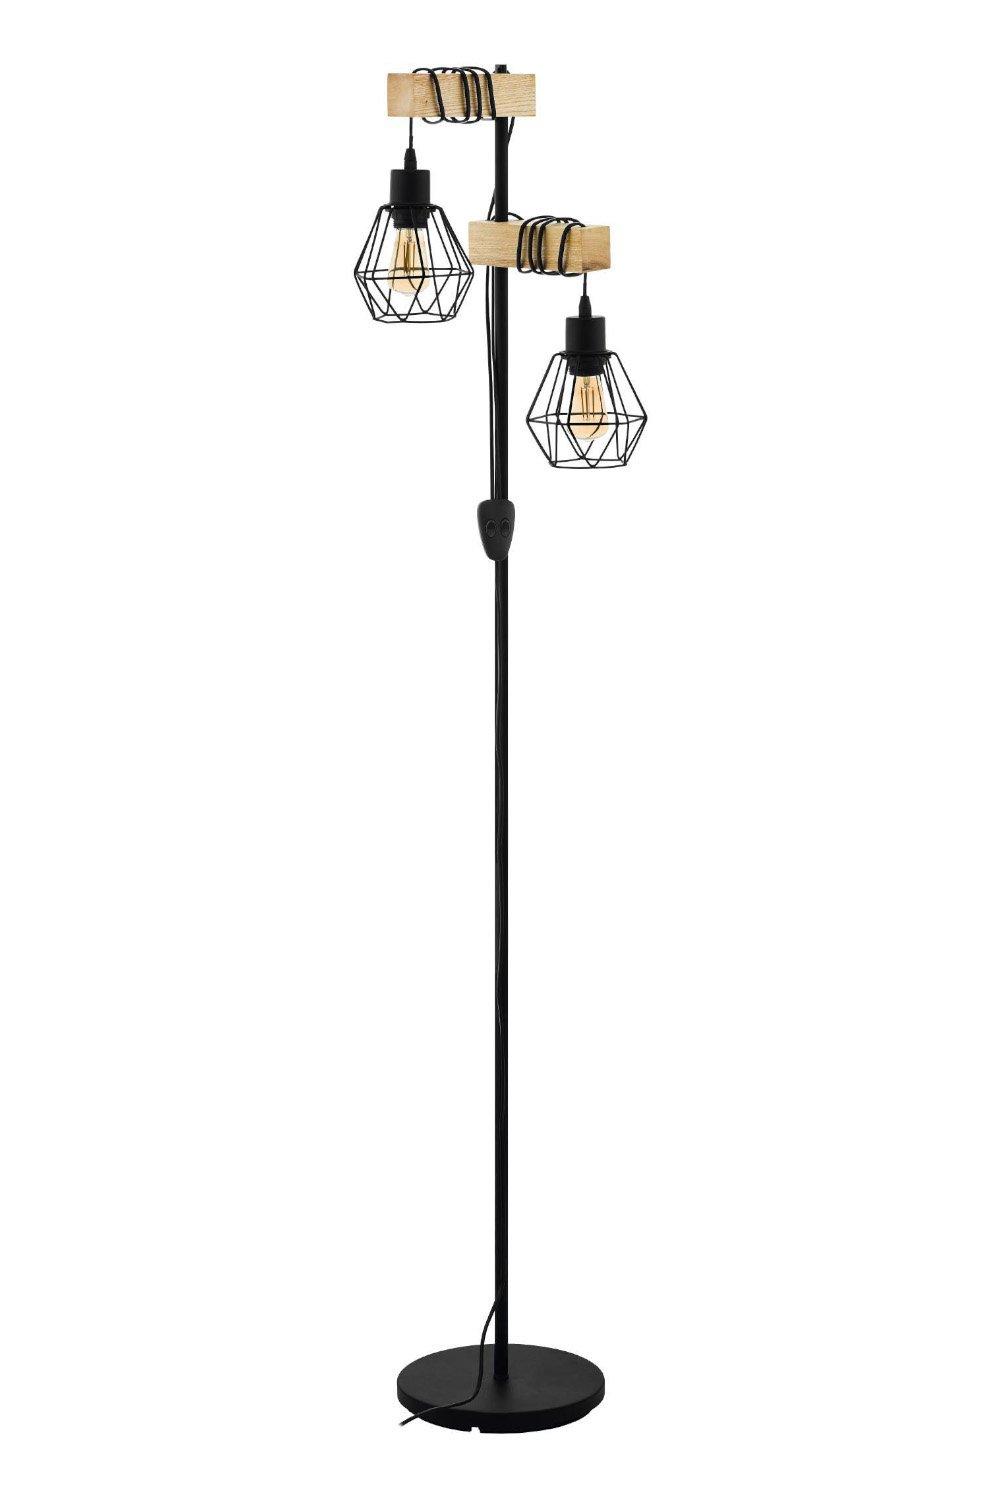 Townshend 5 Natural Metal And Wood 2 Light Floor Lamp